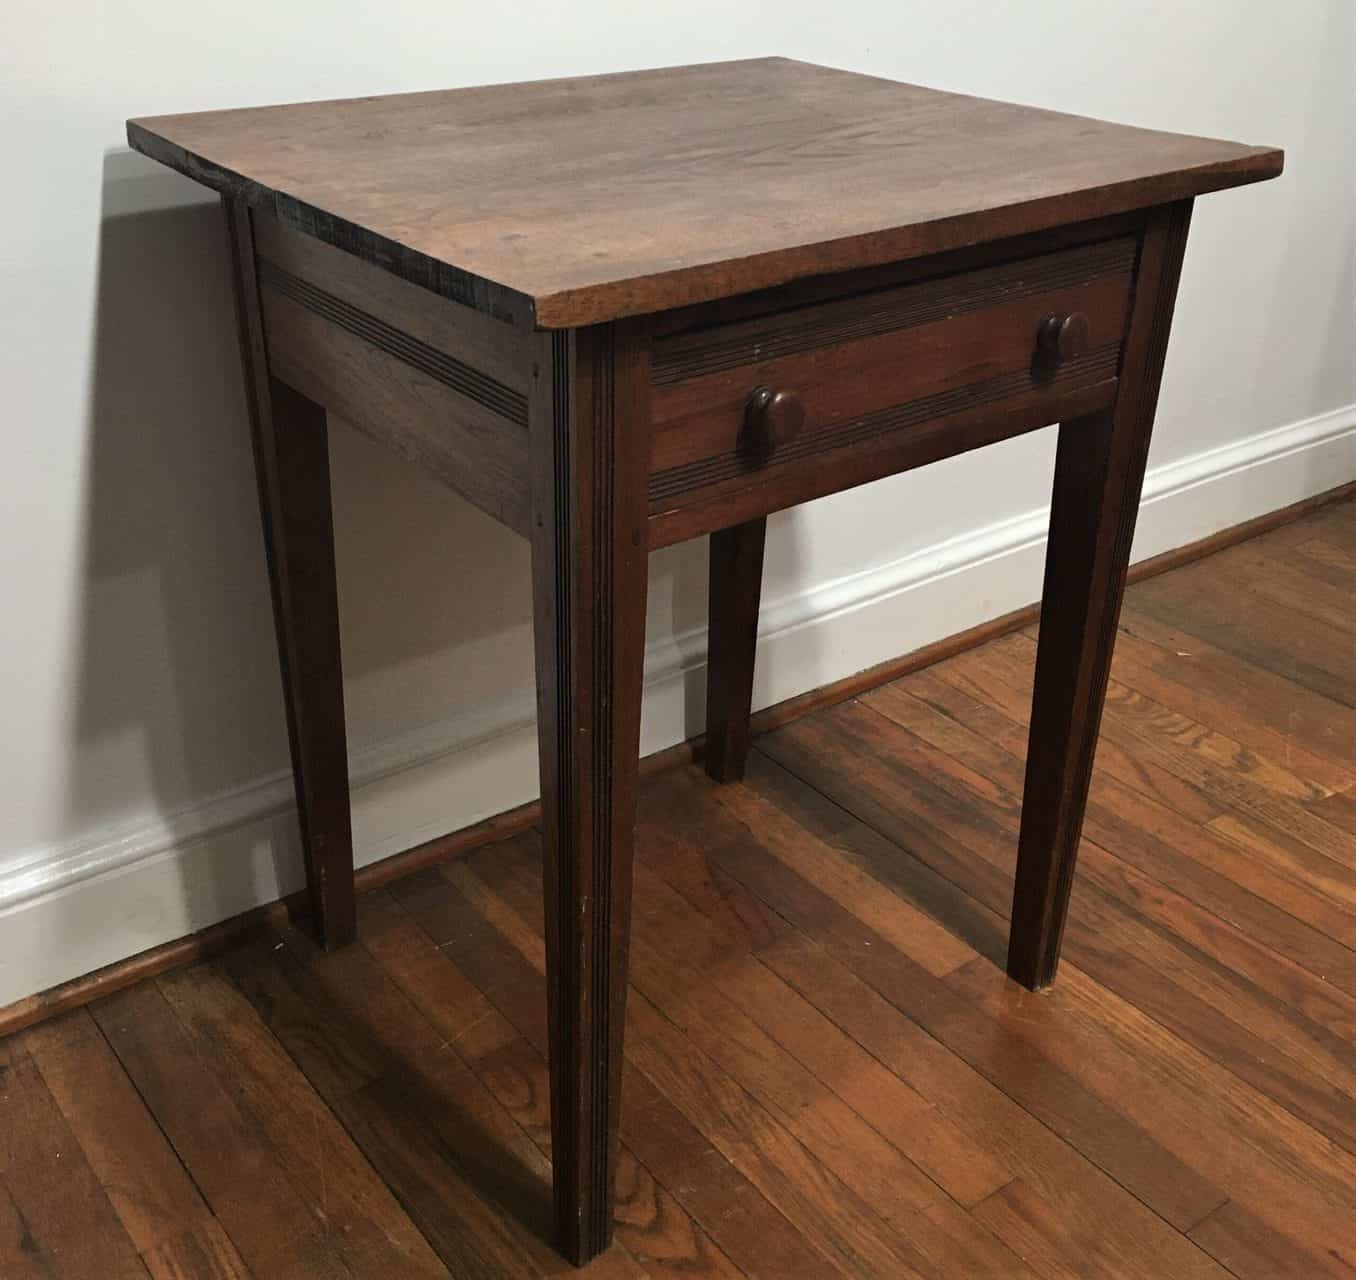 Cherry and walnut side table with a drawer.